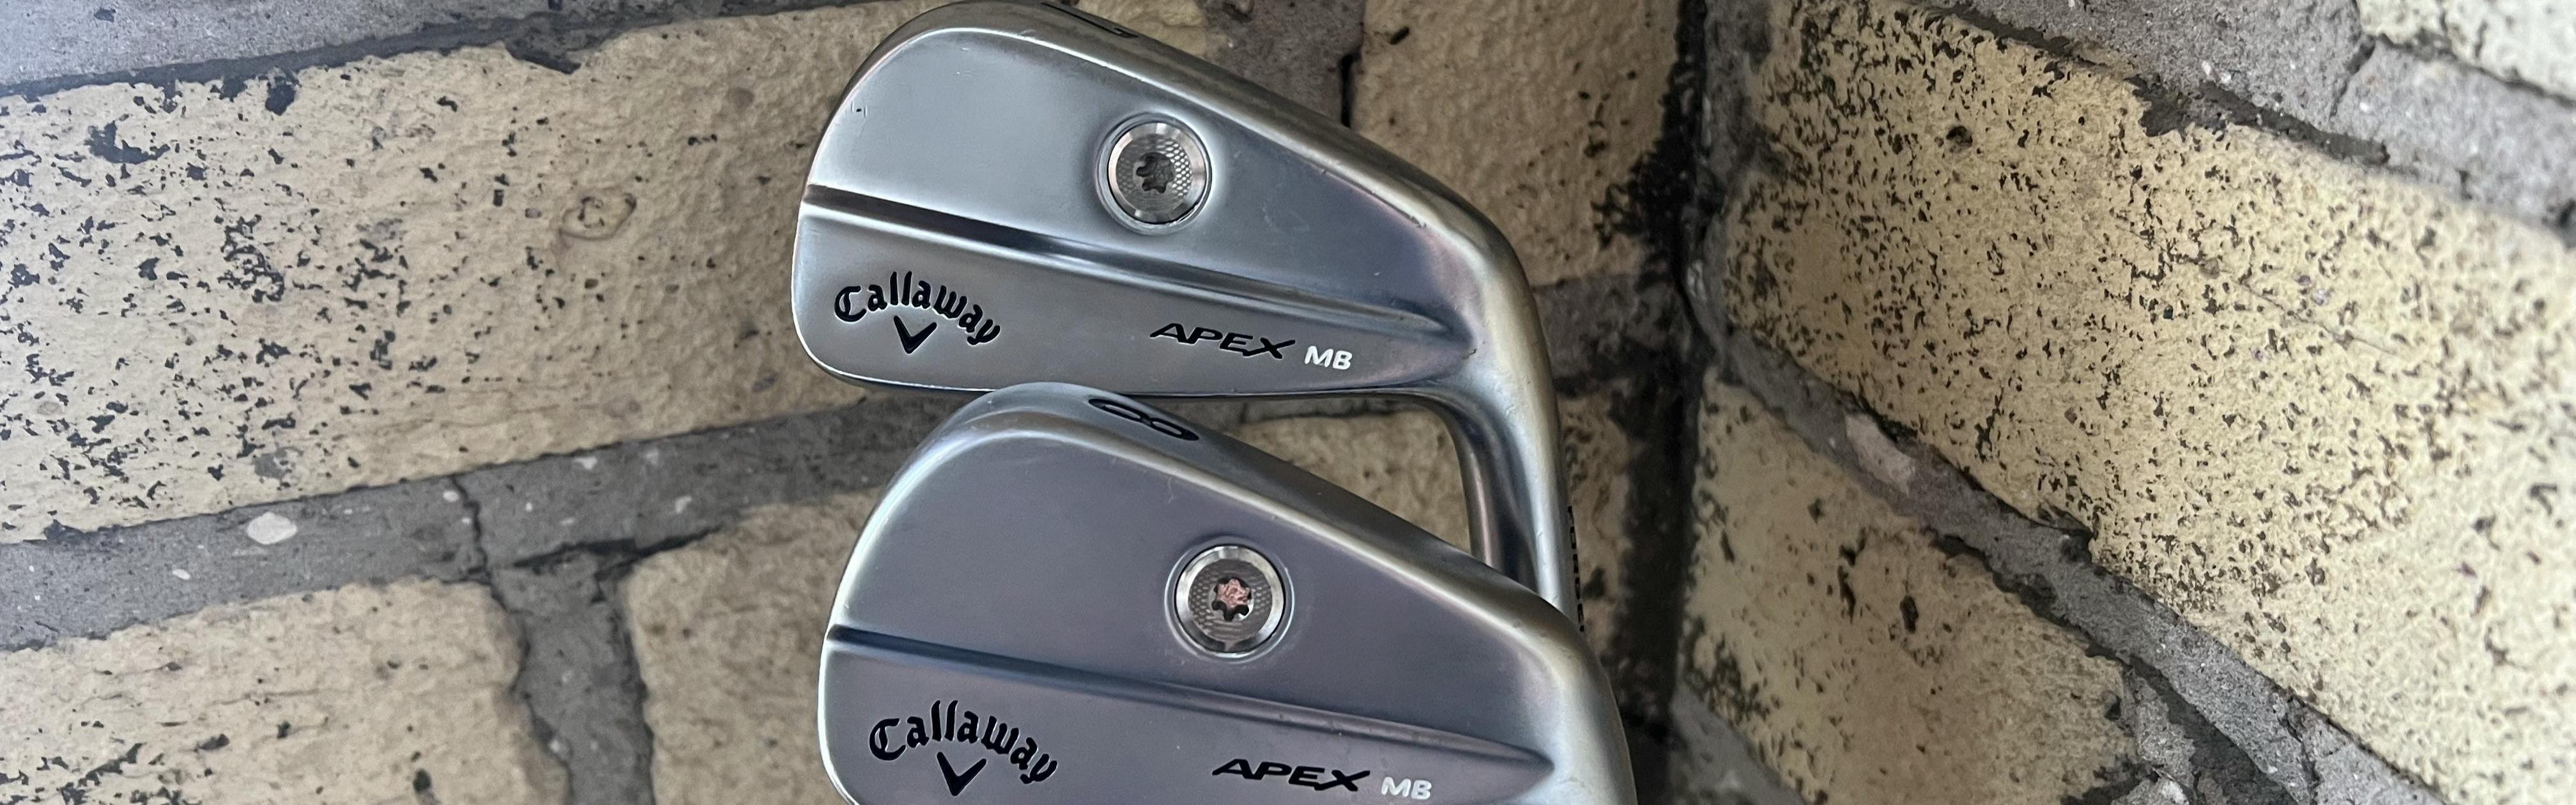 Close up view of Callaway's Apex MB Irons.